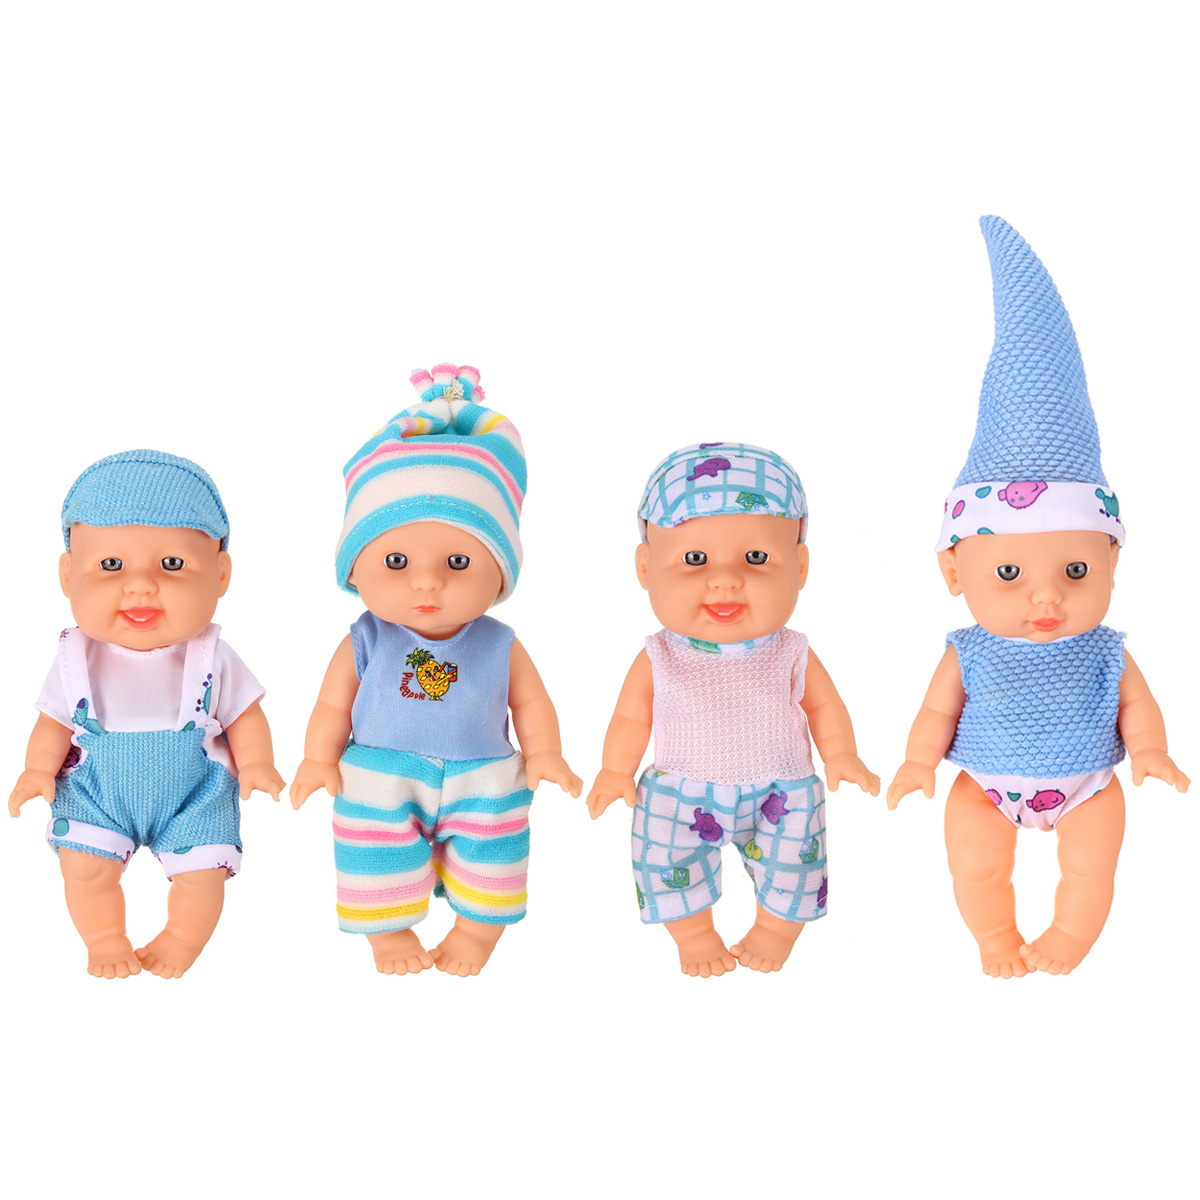 Simulation-Baby-3D-Creative-Cute-Doll-Play-House-Toy-Doll-Vinyl-Doll-Gift-1818655-6